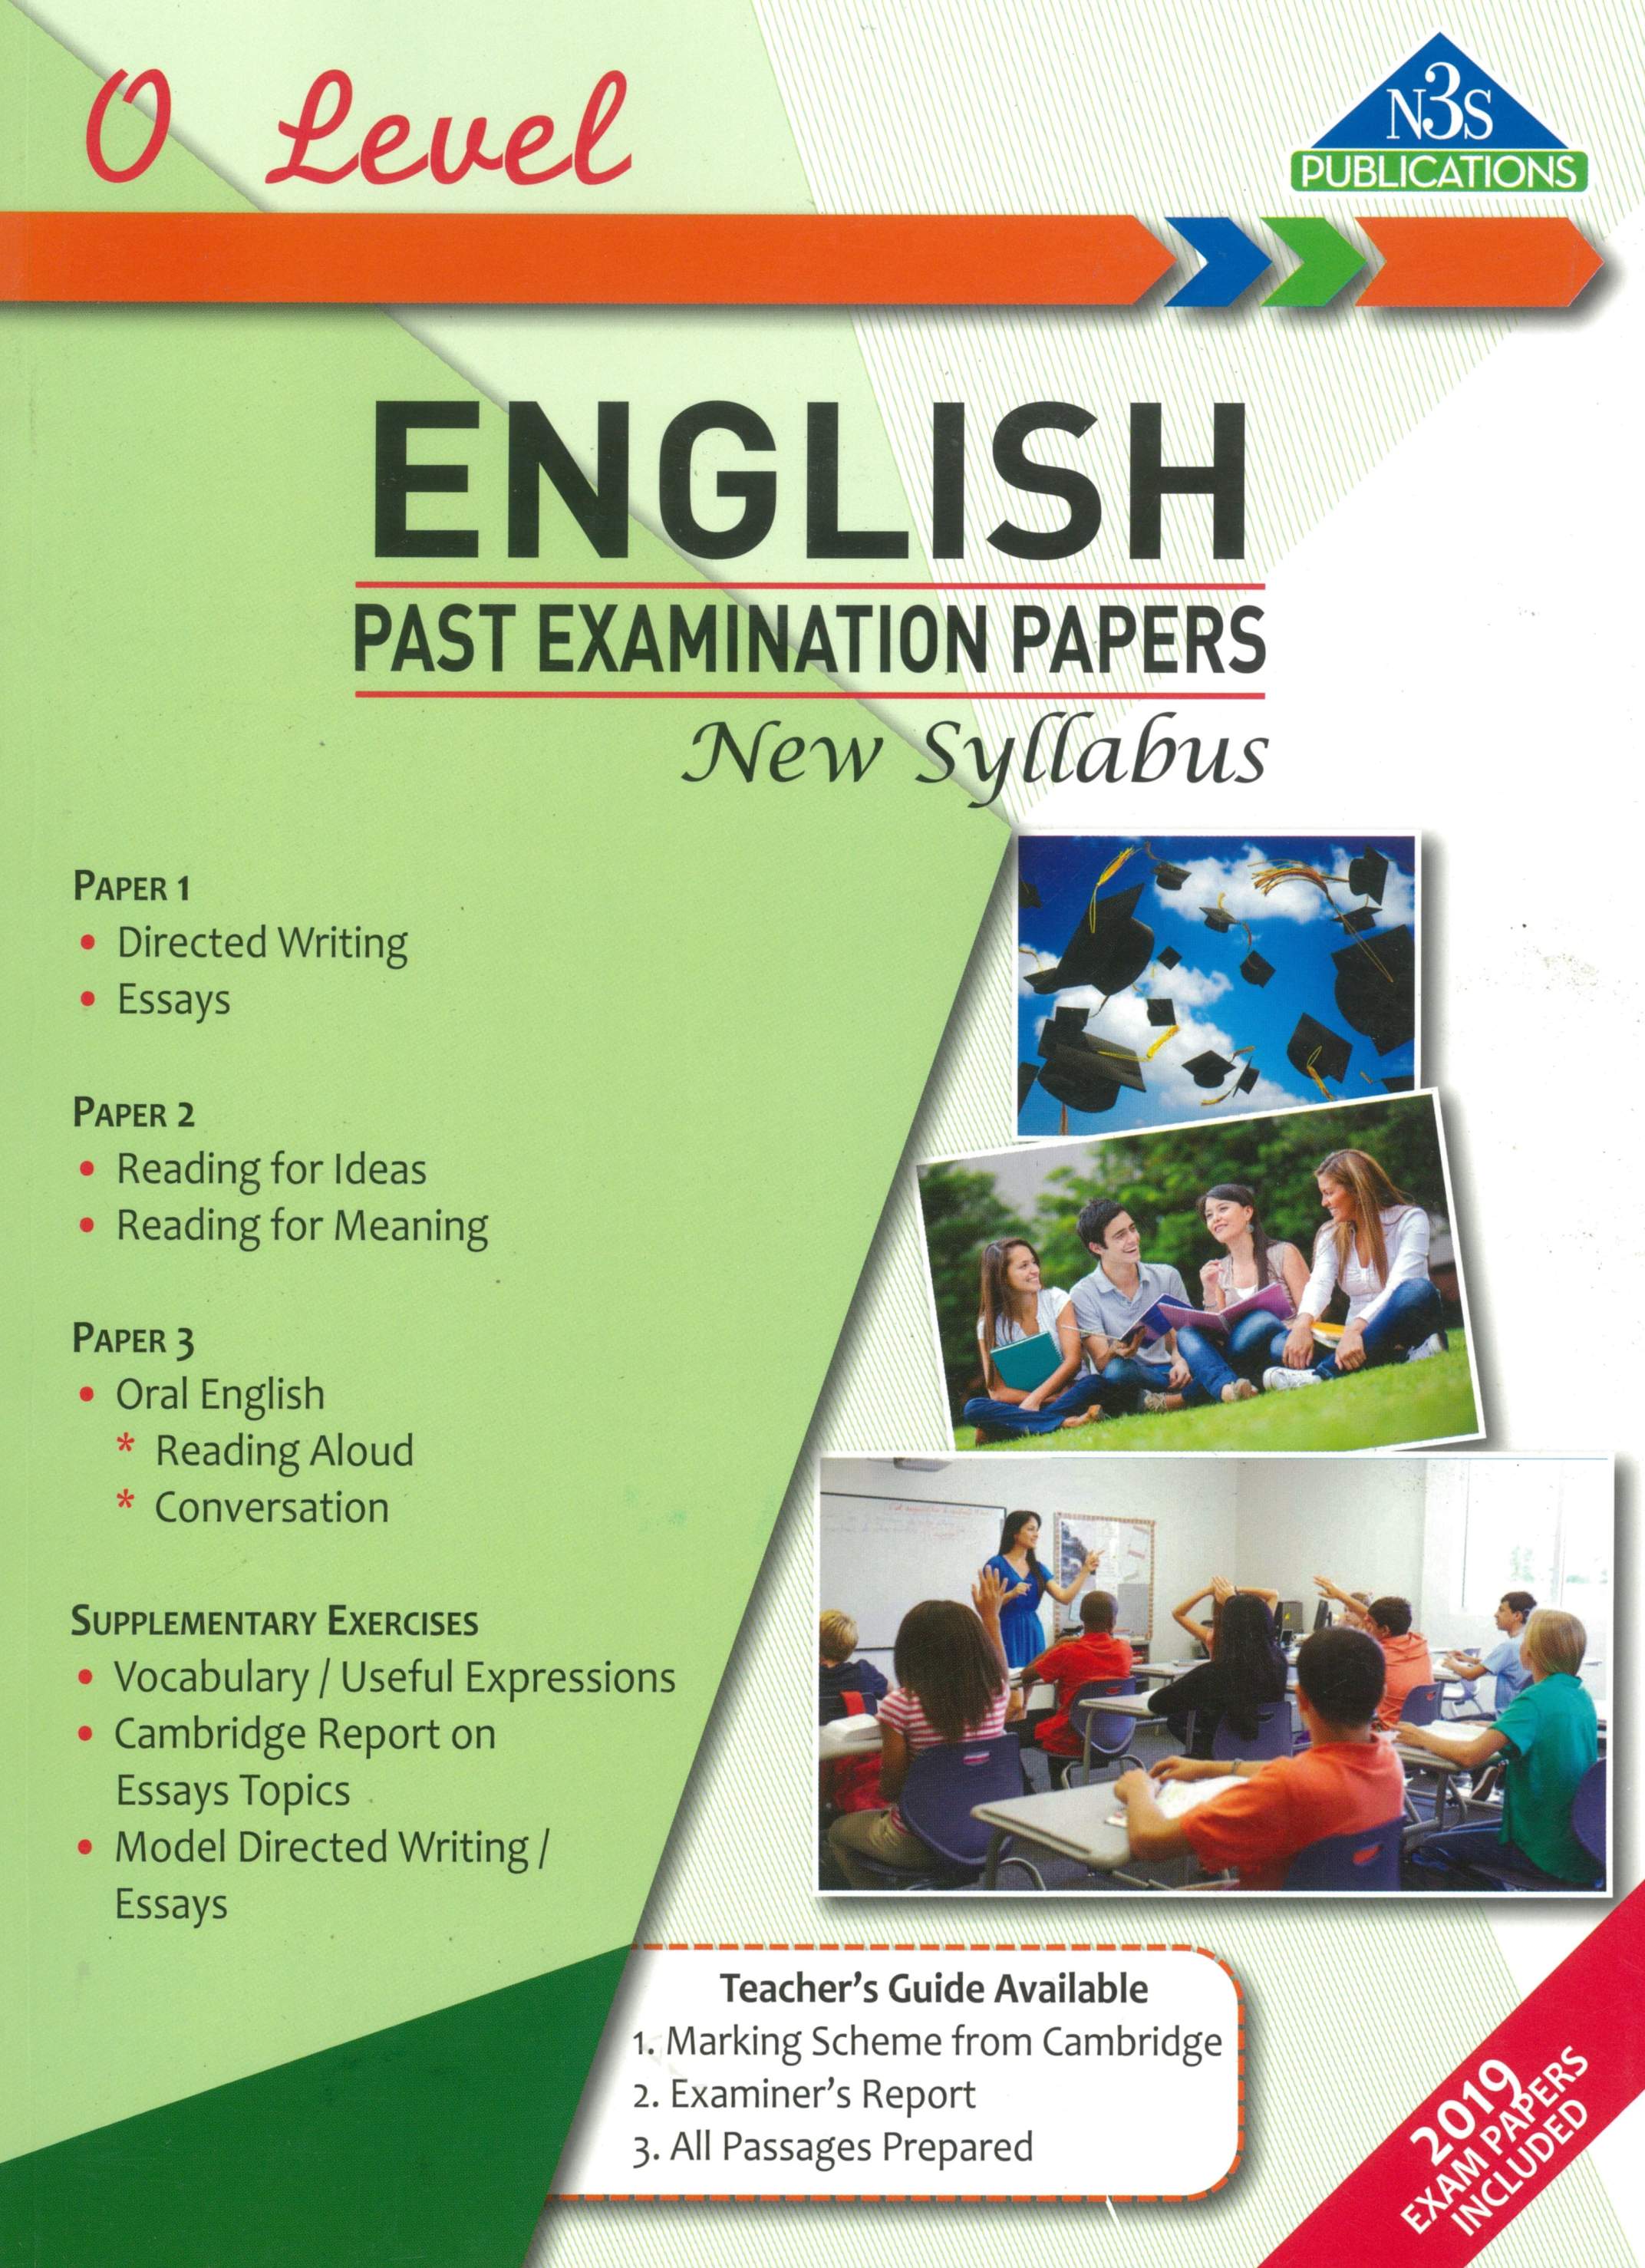 N3S - O LEVEL ENGLISH PAST EXAMINATION PAPERS 2019